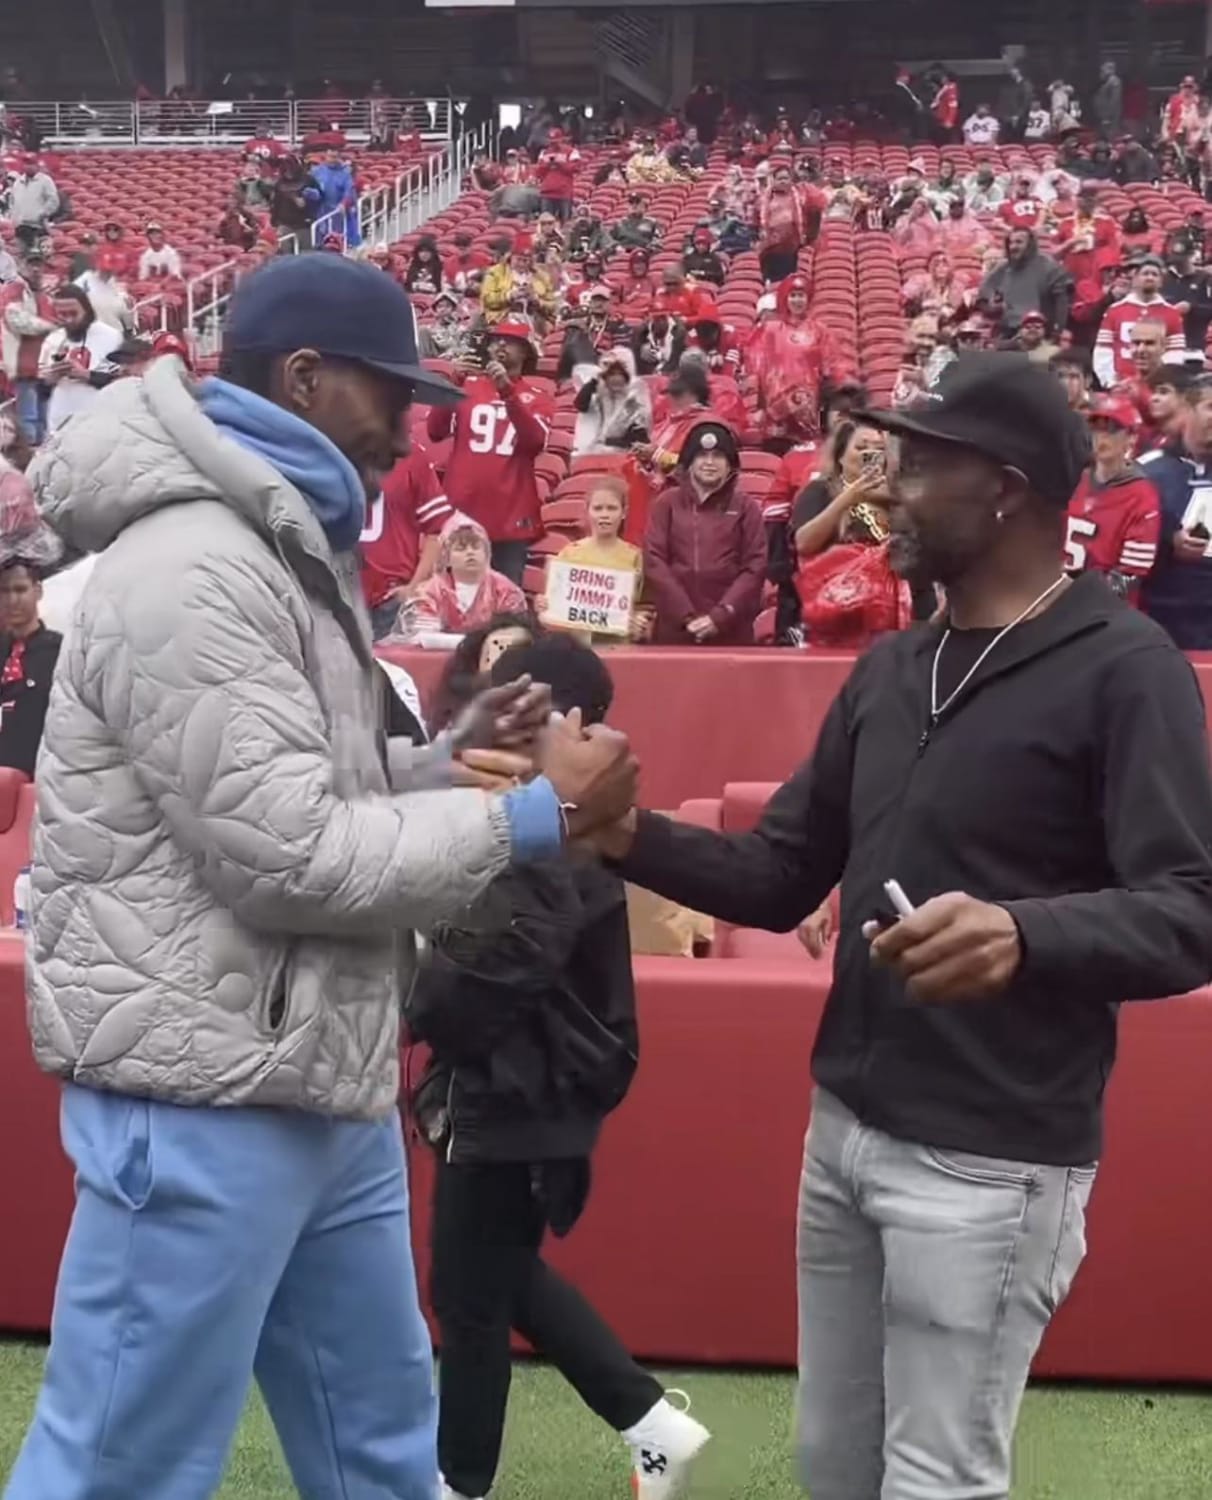 Leonard at the 49ers game. Two 🐐🐐 and my two favorite teams!